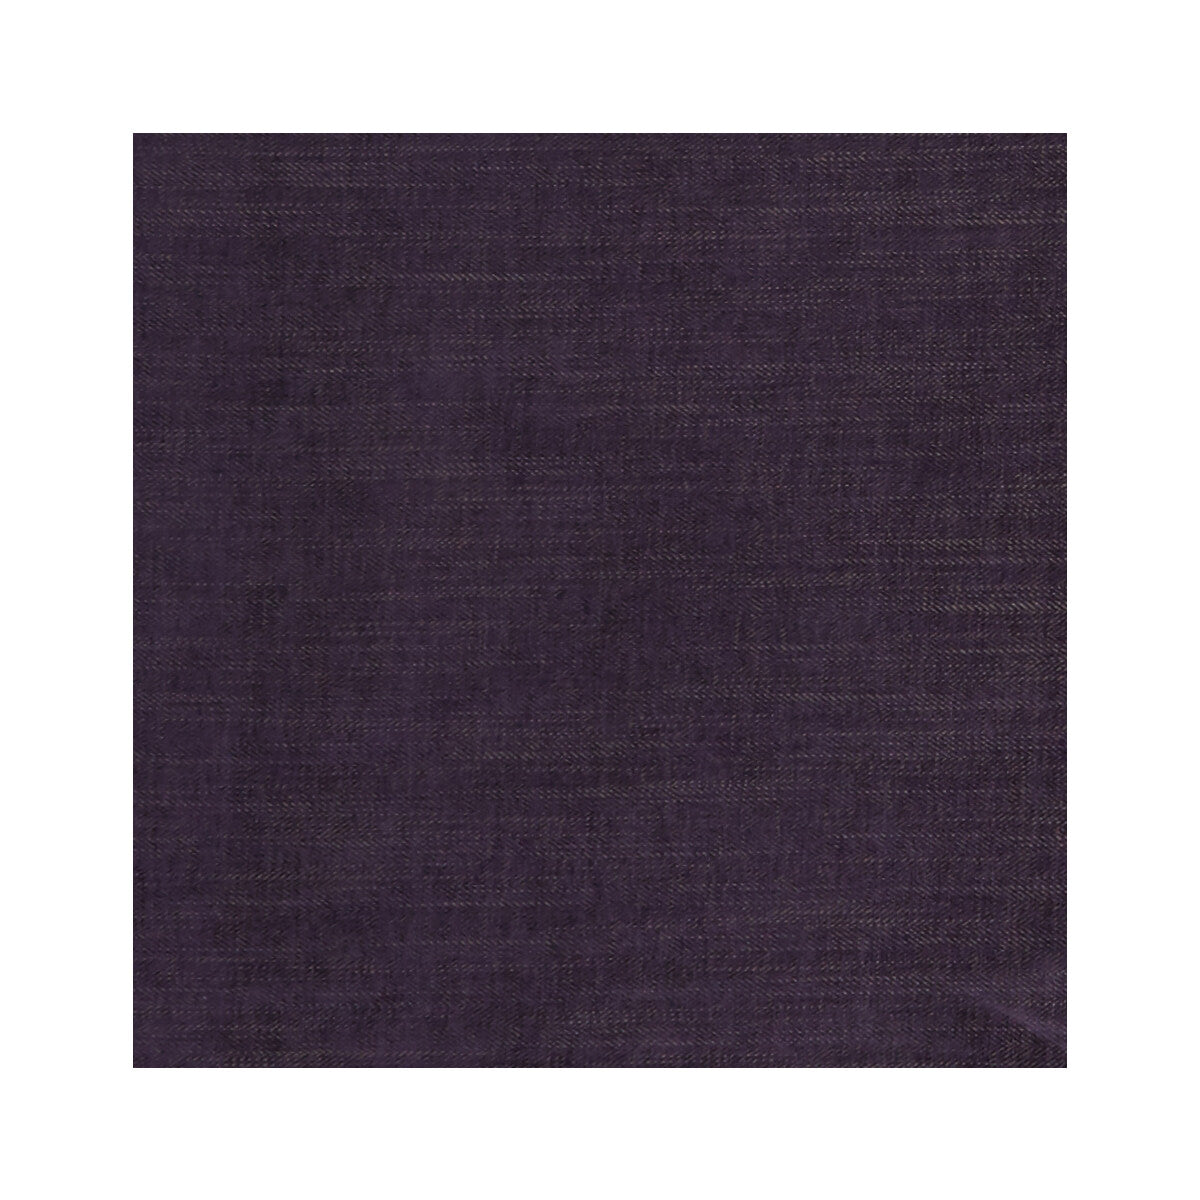 Moray fabric in grape color - pattern F1099/13.CAC.0 - by Clarke And Clarke in the Clarke &amp; Clarke Albany &amp; Moray collection